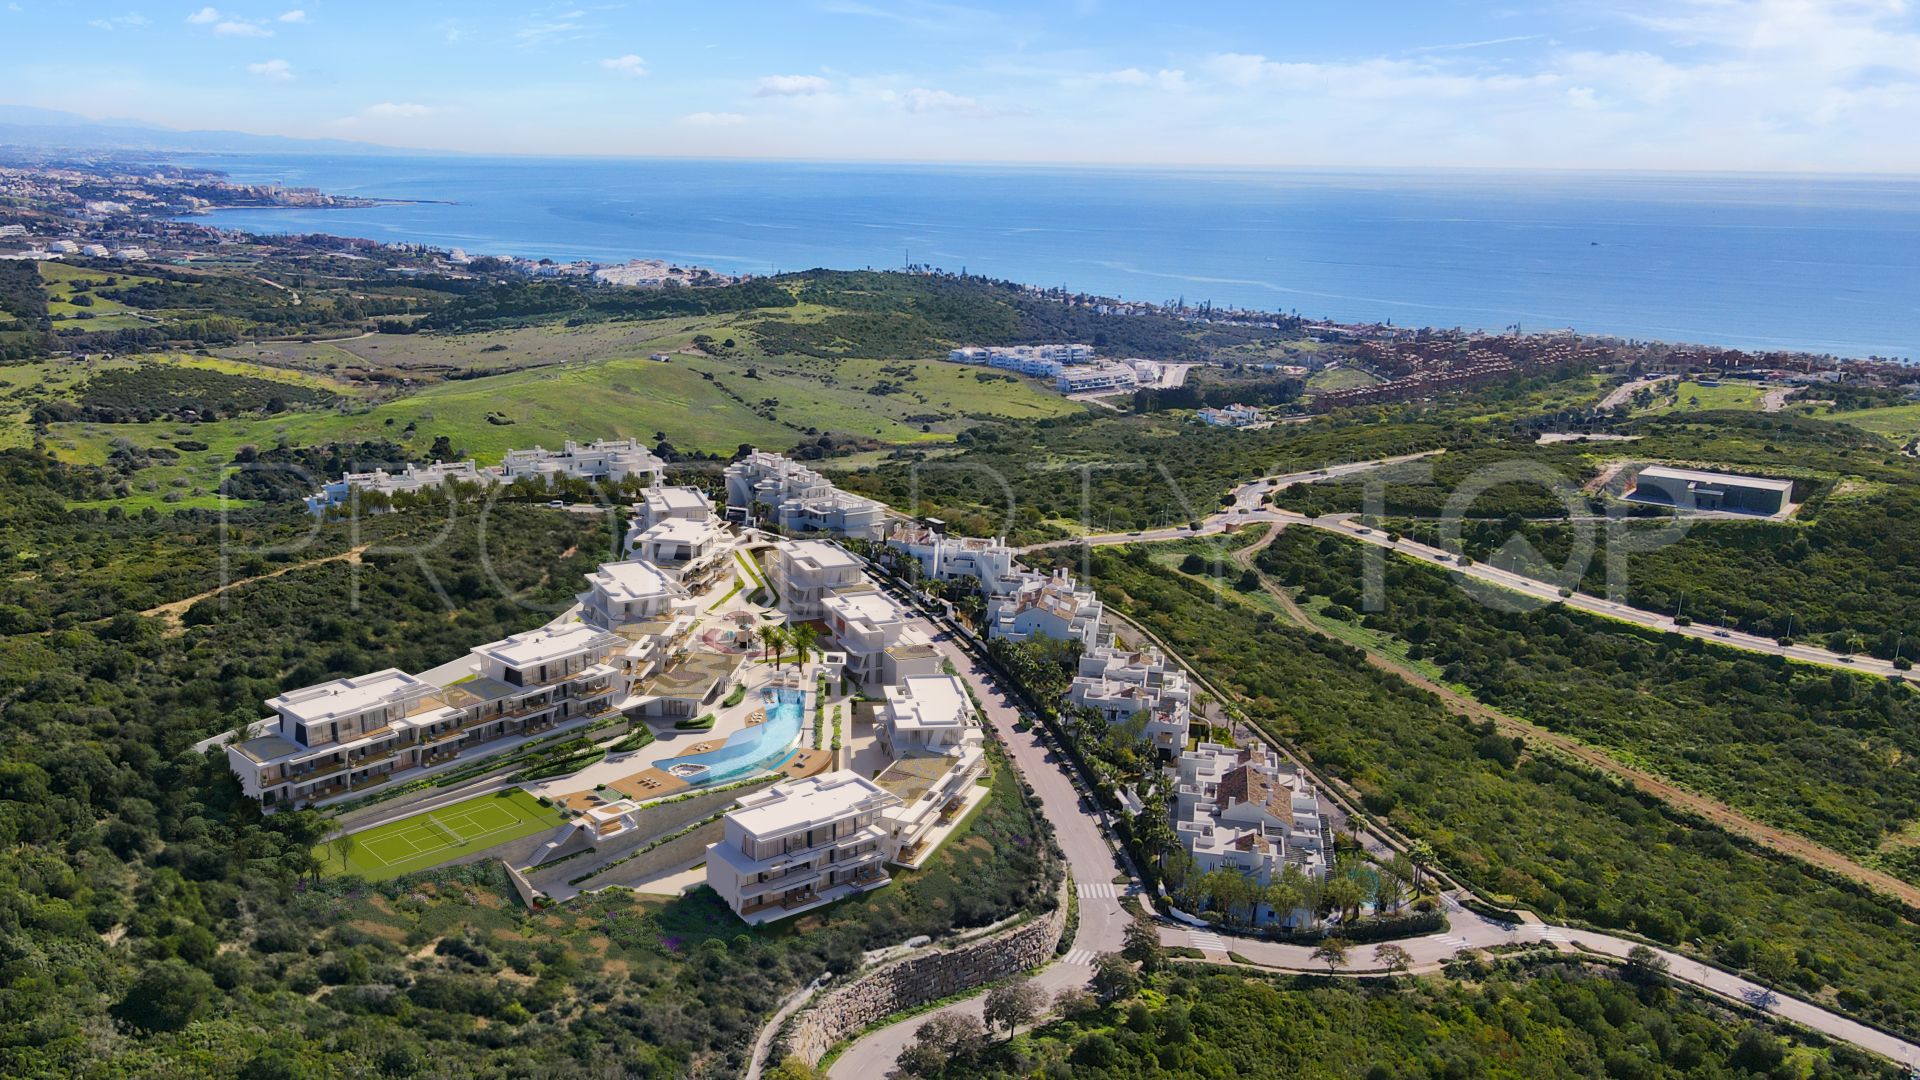 Apartment for sale in Finca Cortesin with 2 bedrooms